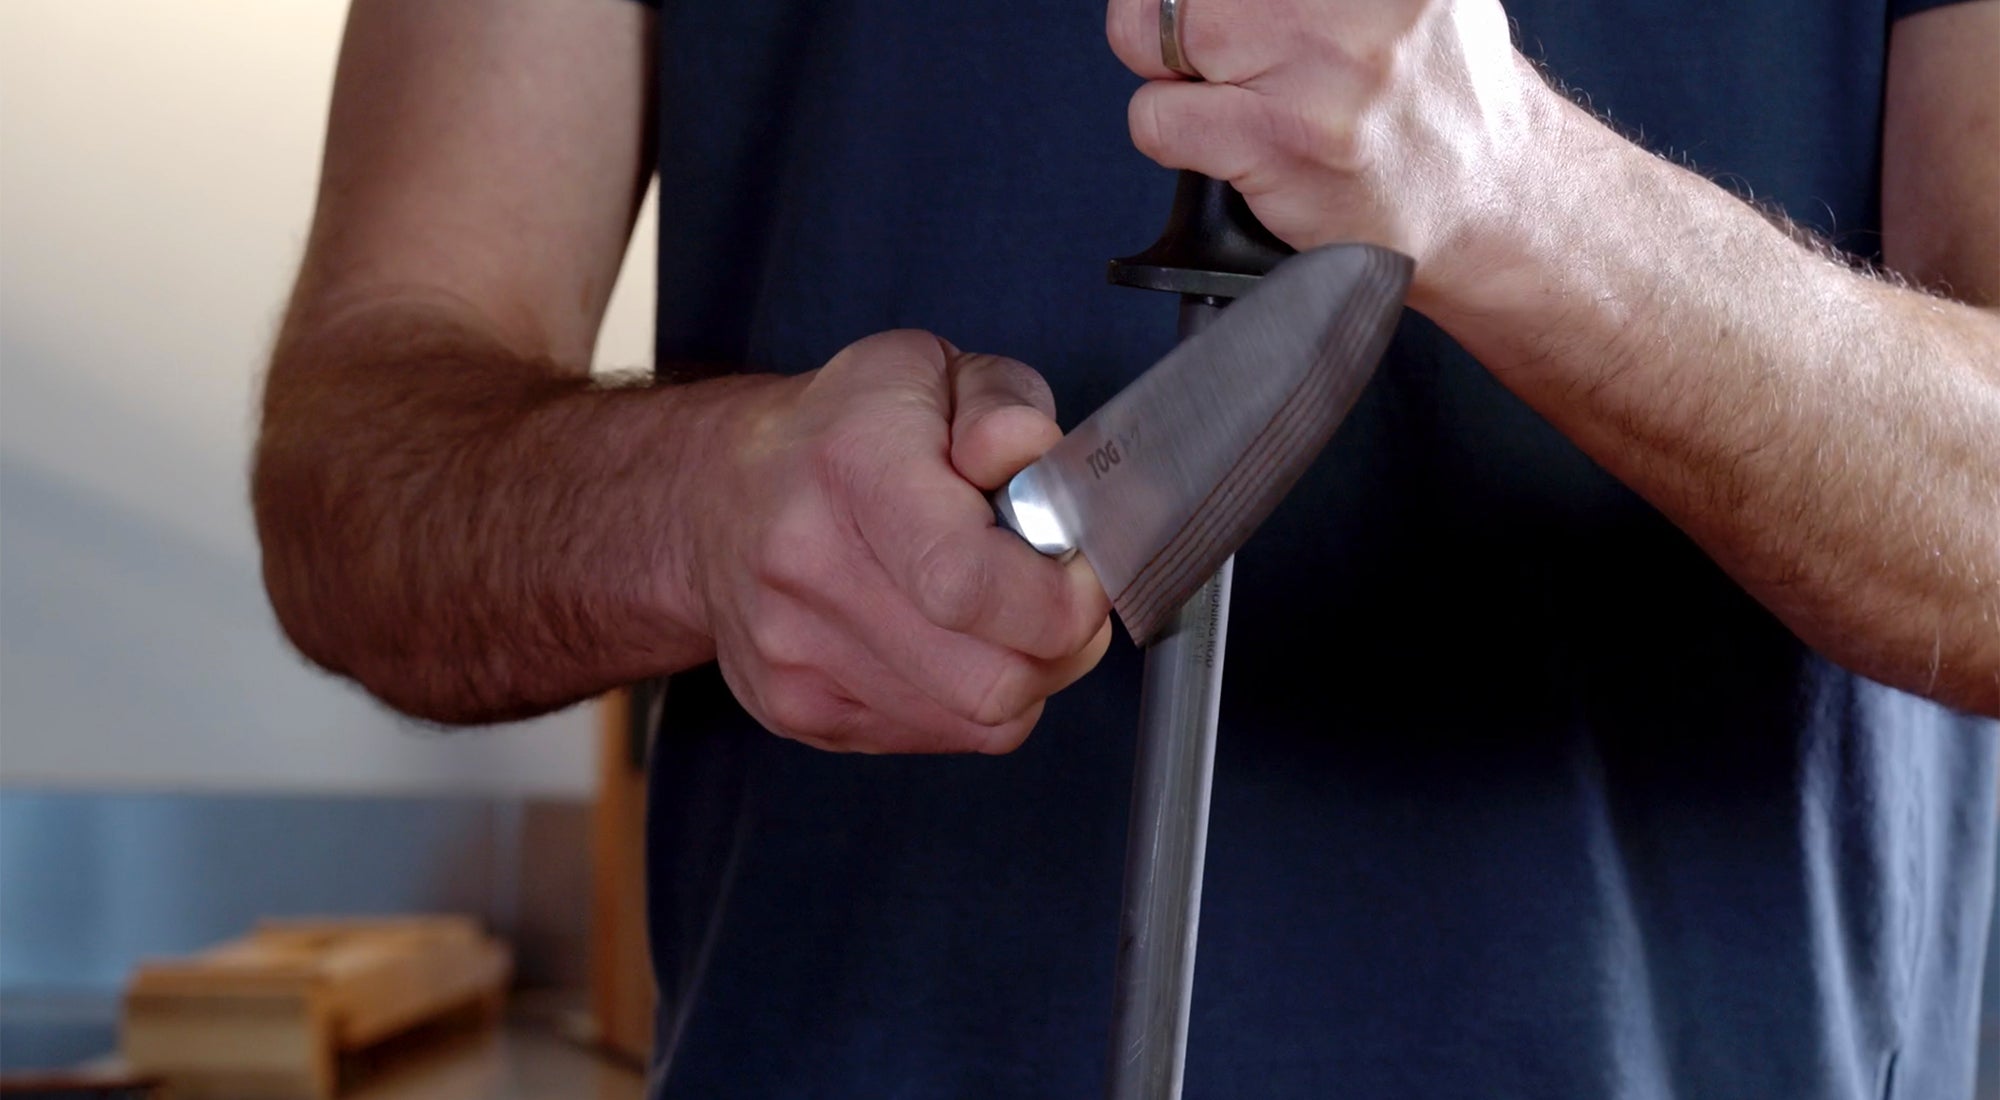 How to sharpen a knife with a honing rod or steel